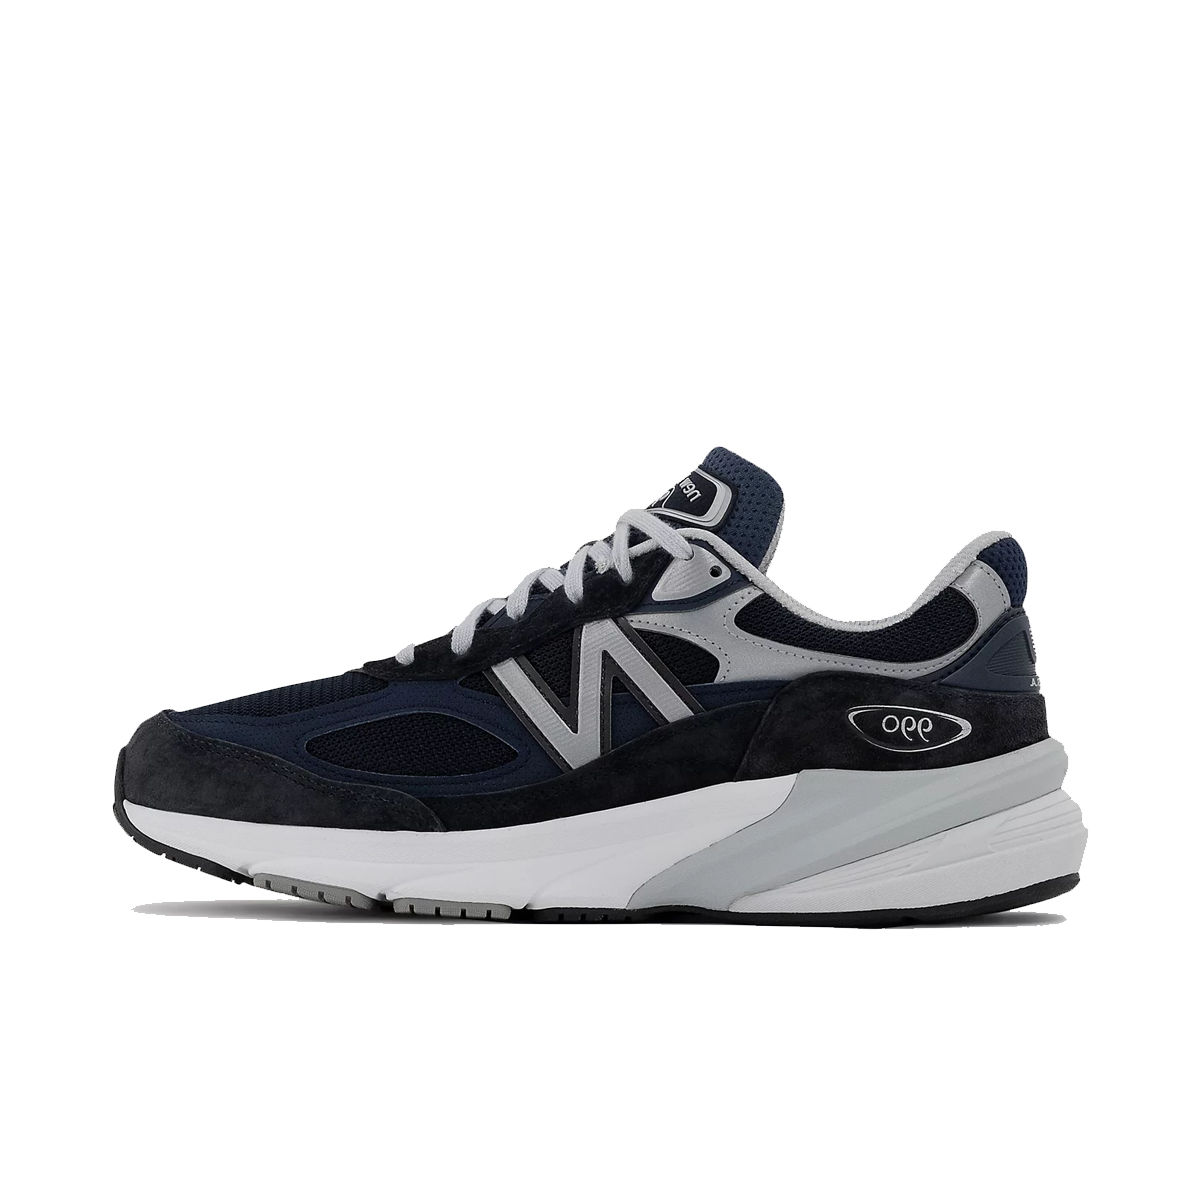 New Balance 990v6 WMNS 'Navy' - Made in UK